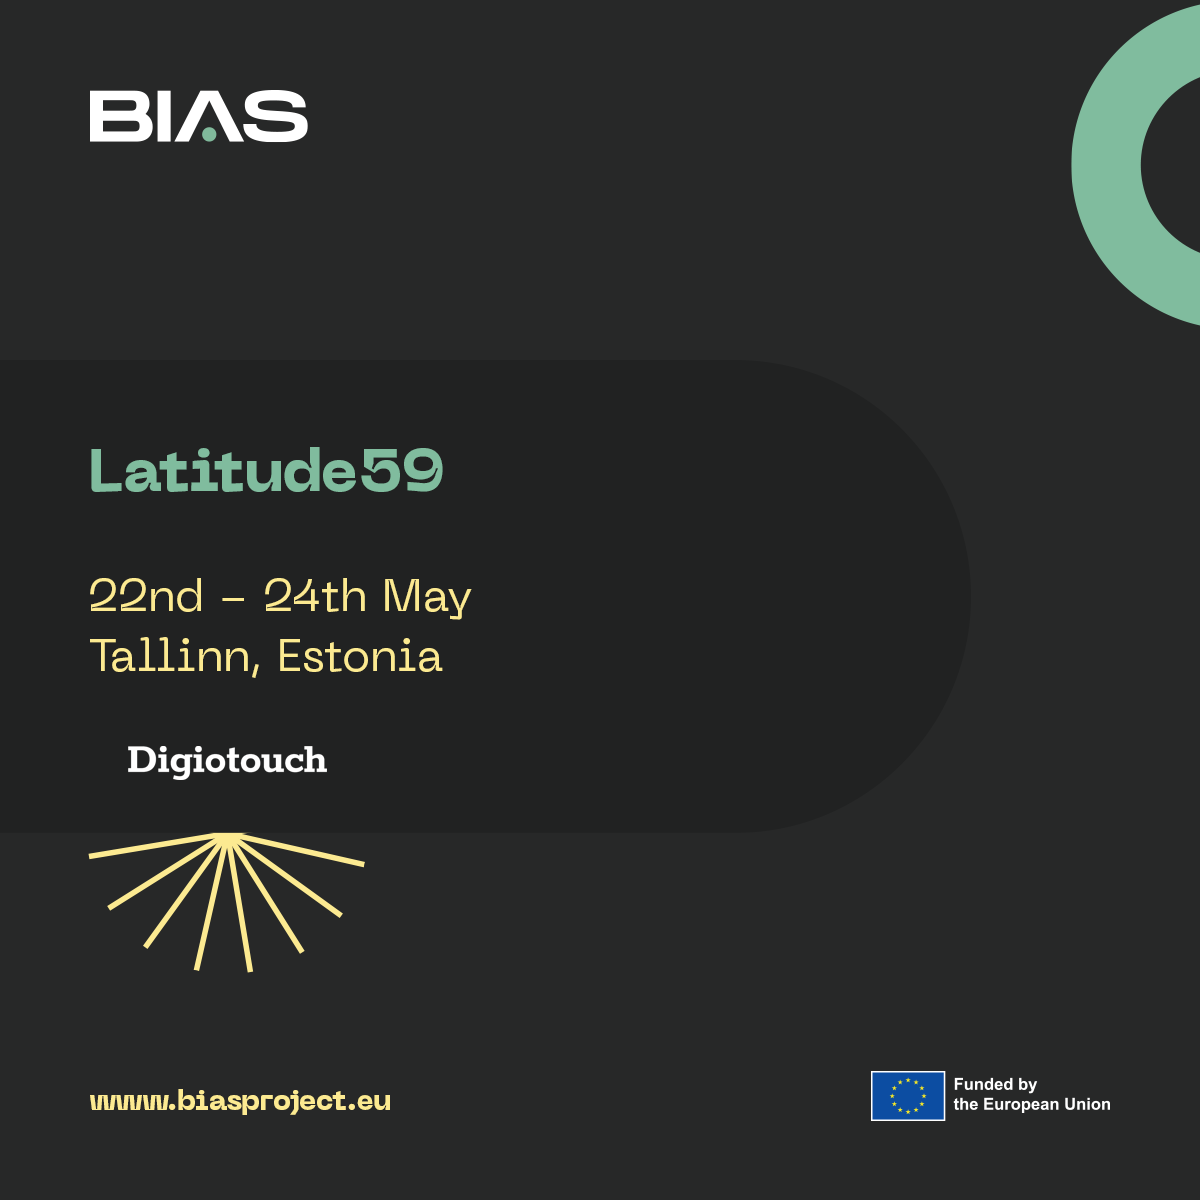 BIAS and Digiotouch at Latitude59: Trustworthy AI for Recruitment